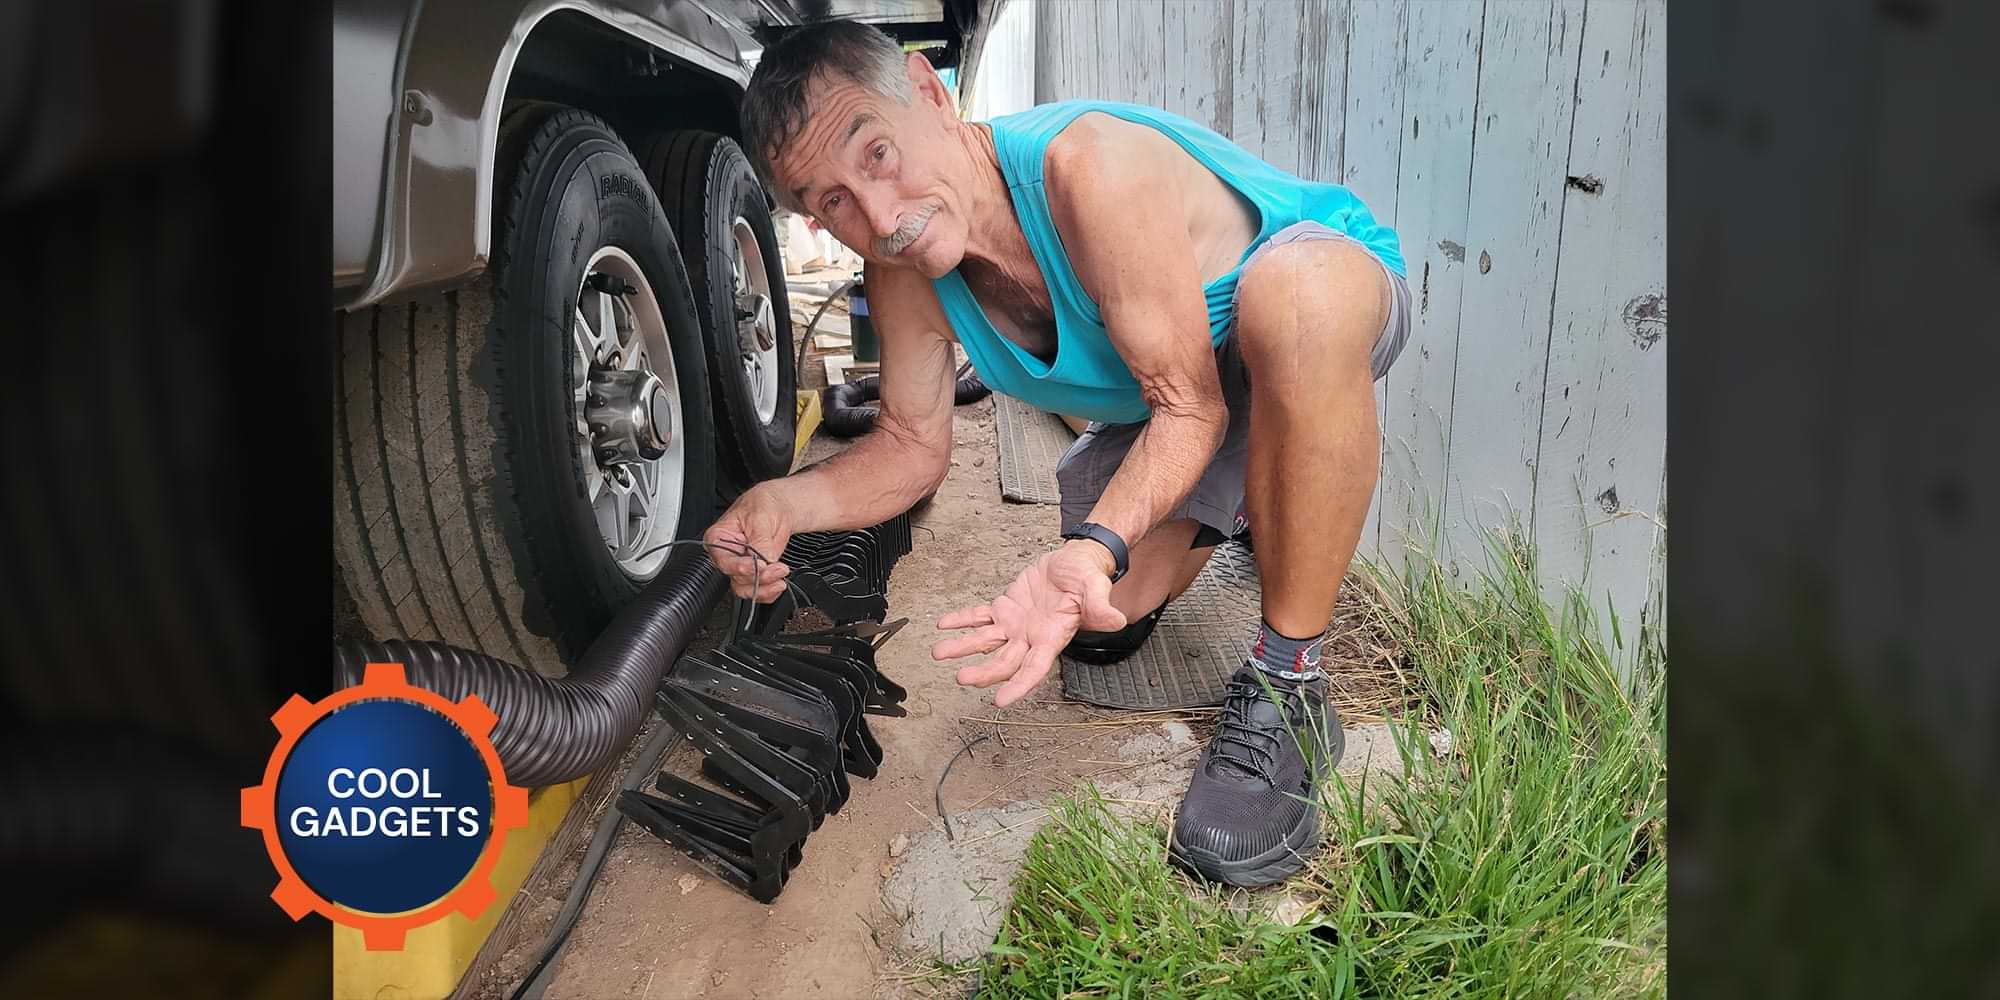 RV technician in the process of securing a sewer hose with zip ties